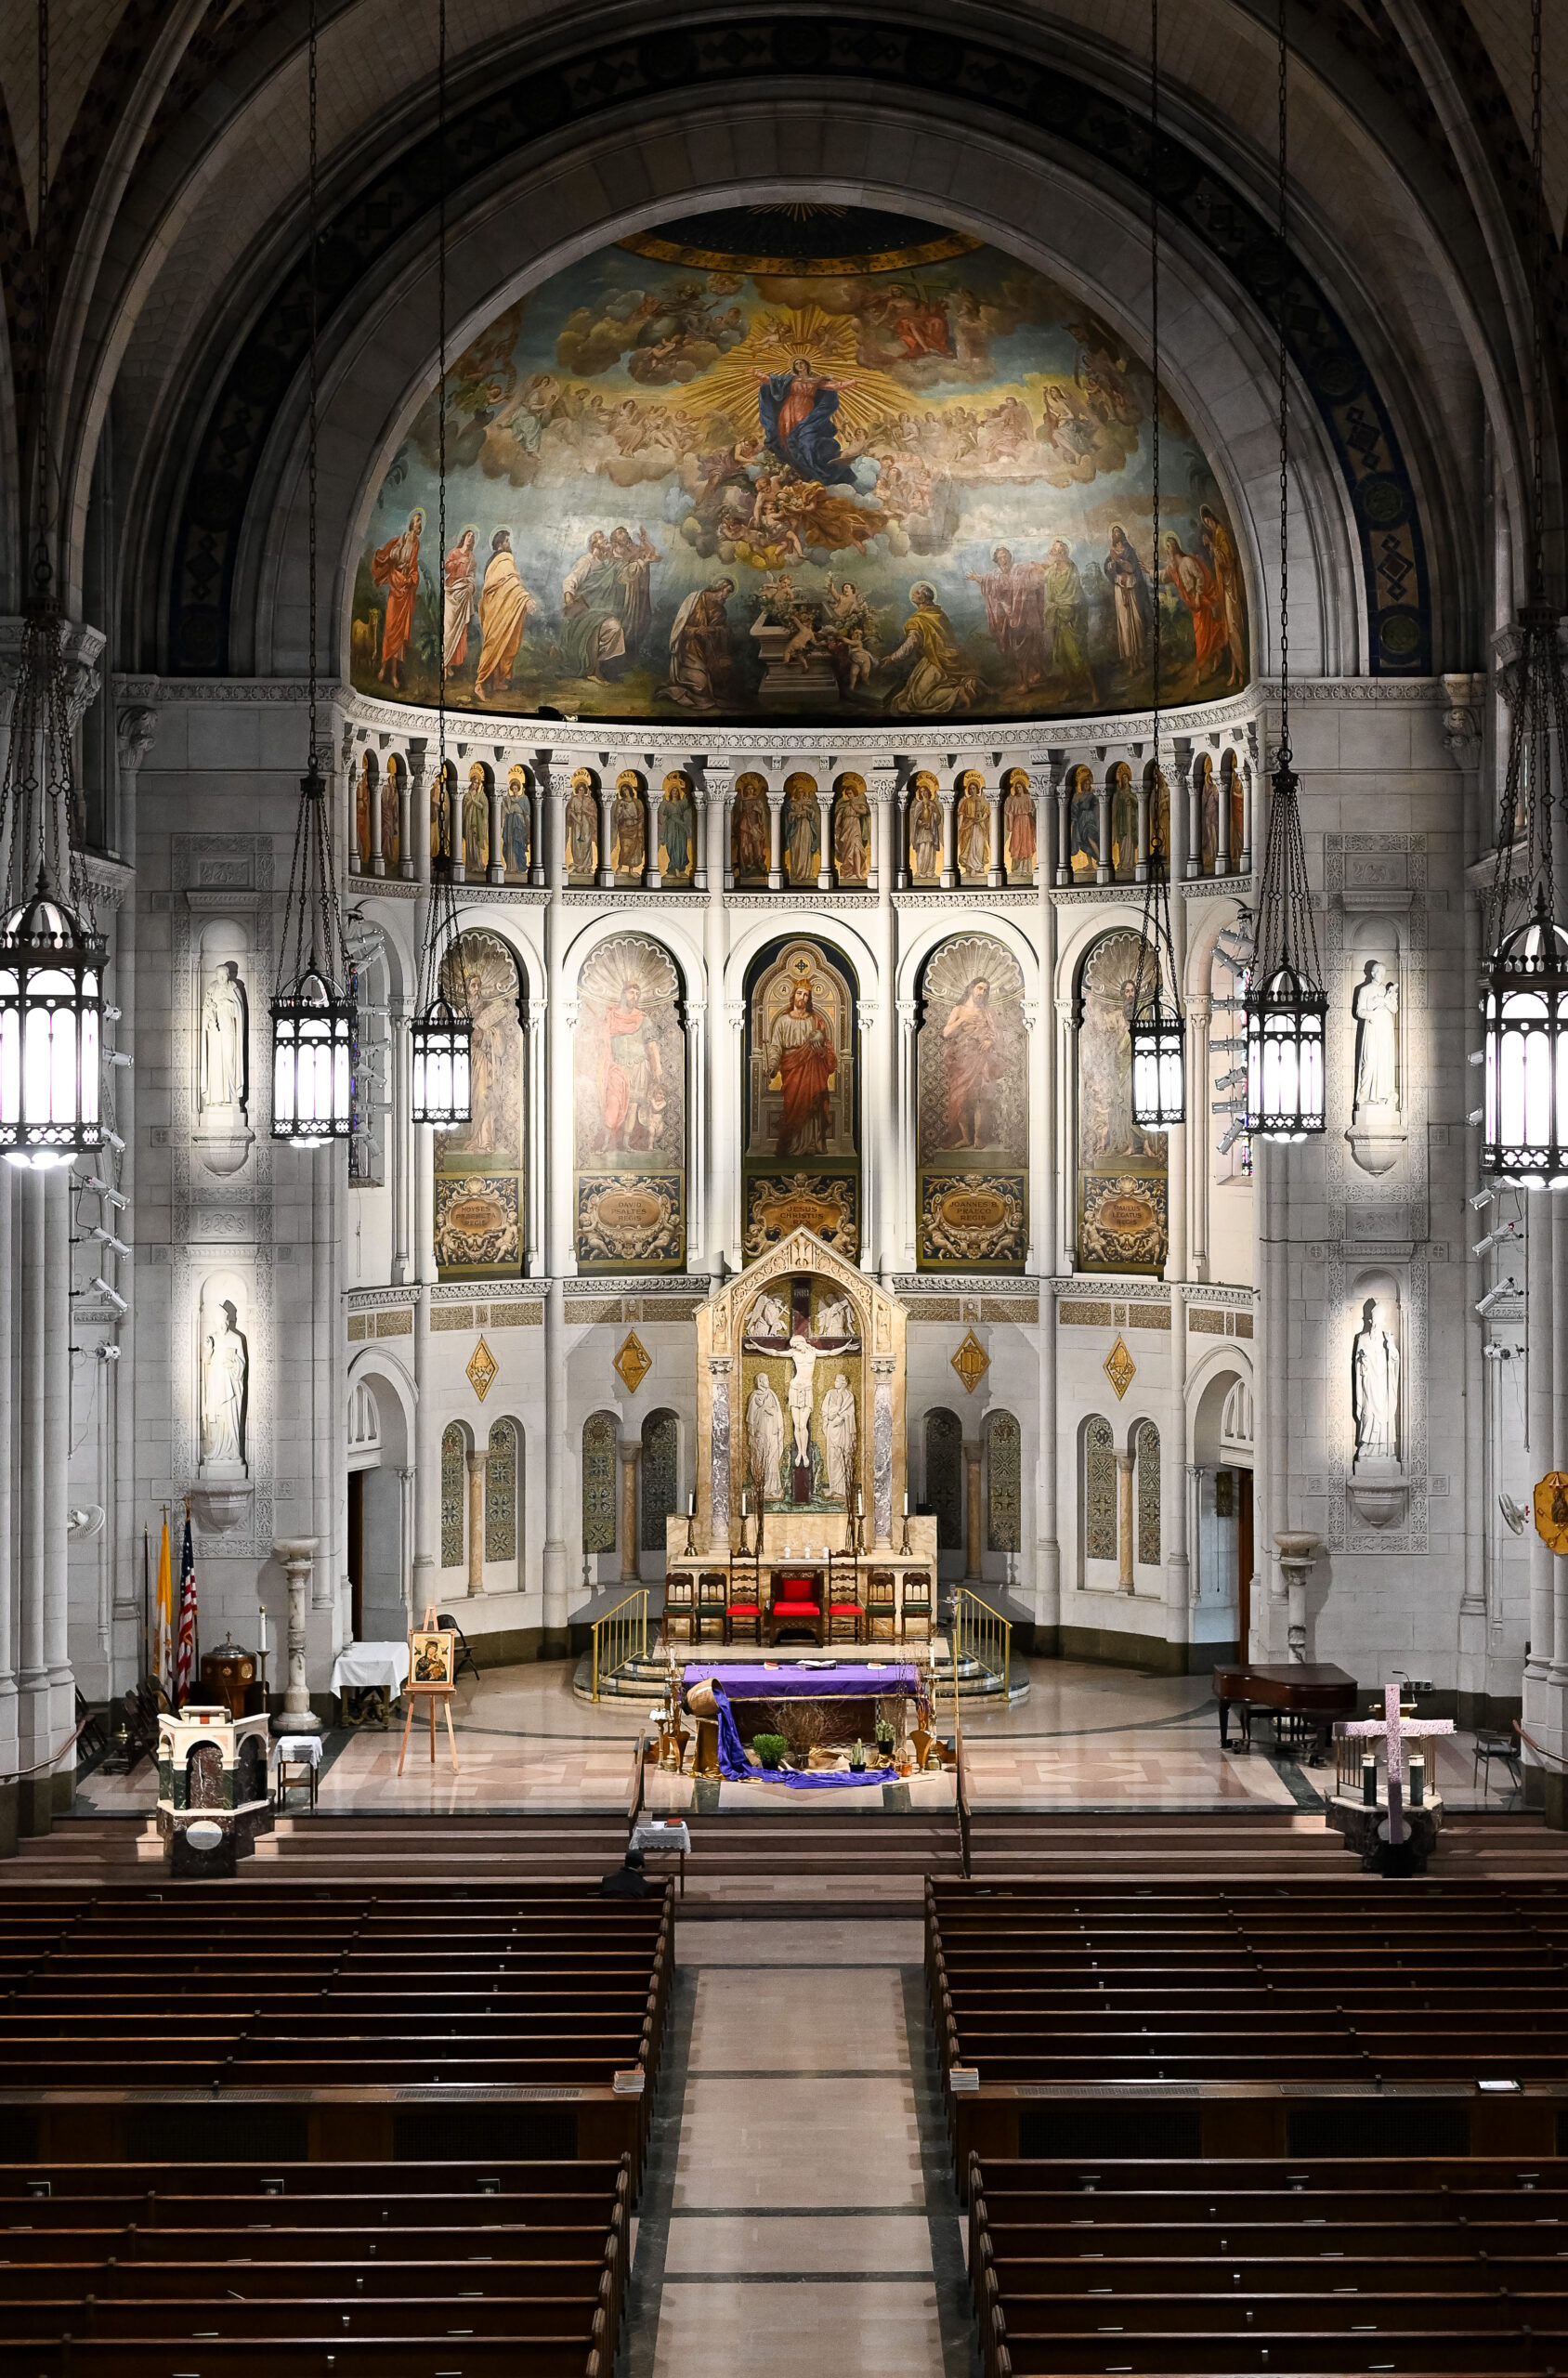 Interior of a cathedral featuring a large altar, ornate religious paintings, and rows of pews viewed from the aisle. high vaulted ceilings and hanging lights add to the grandeur.